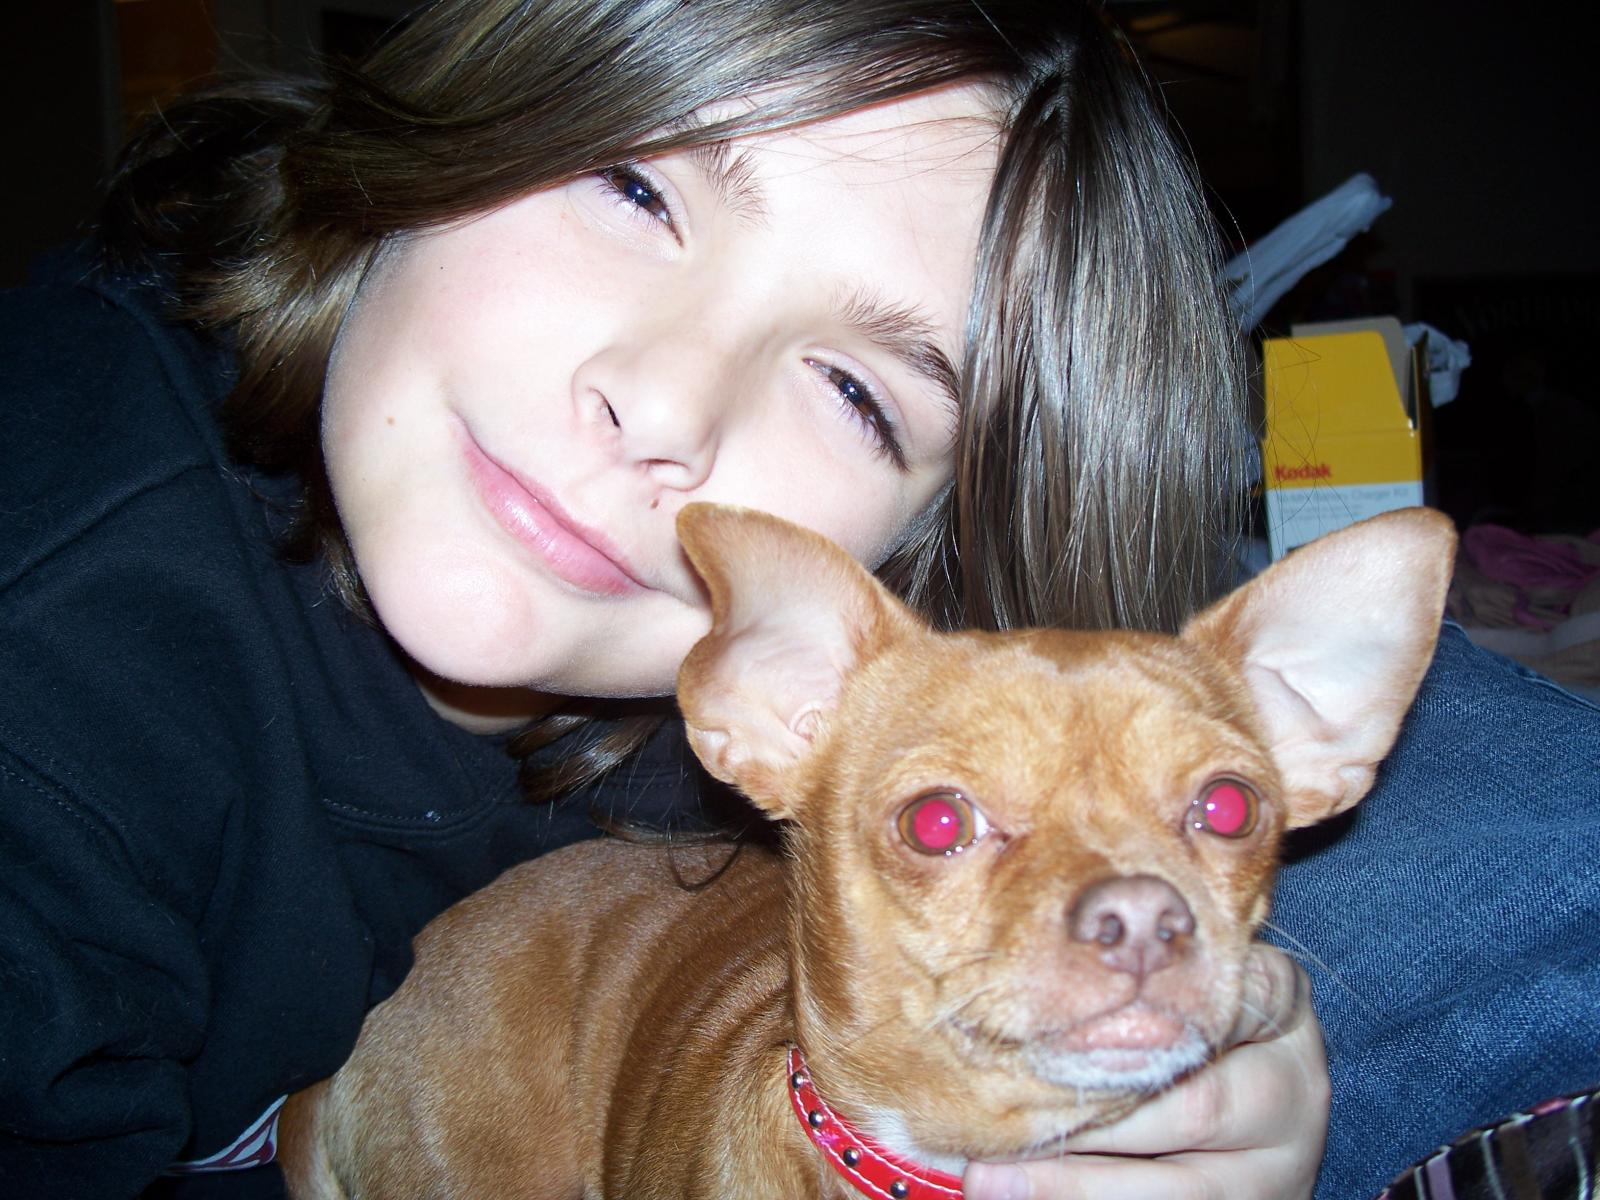 My son and our little chihuahua "Leo"